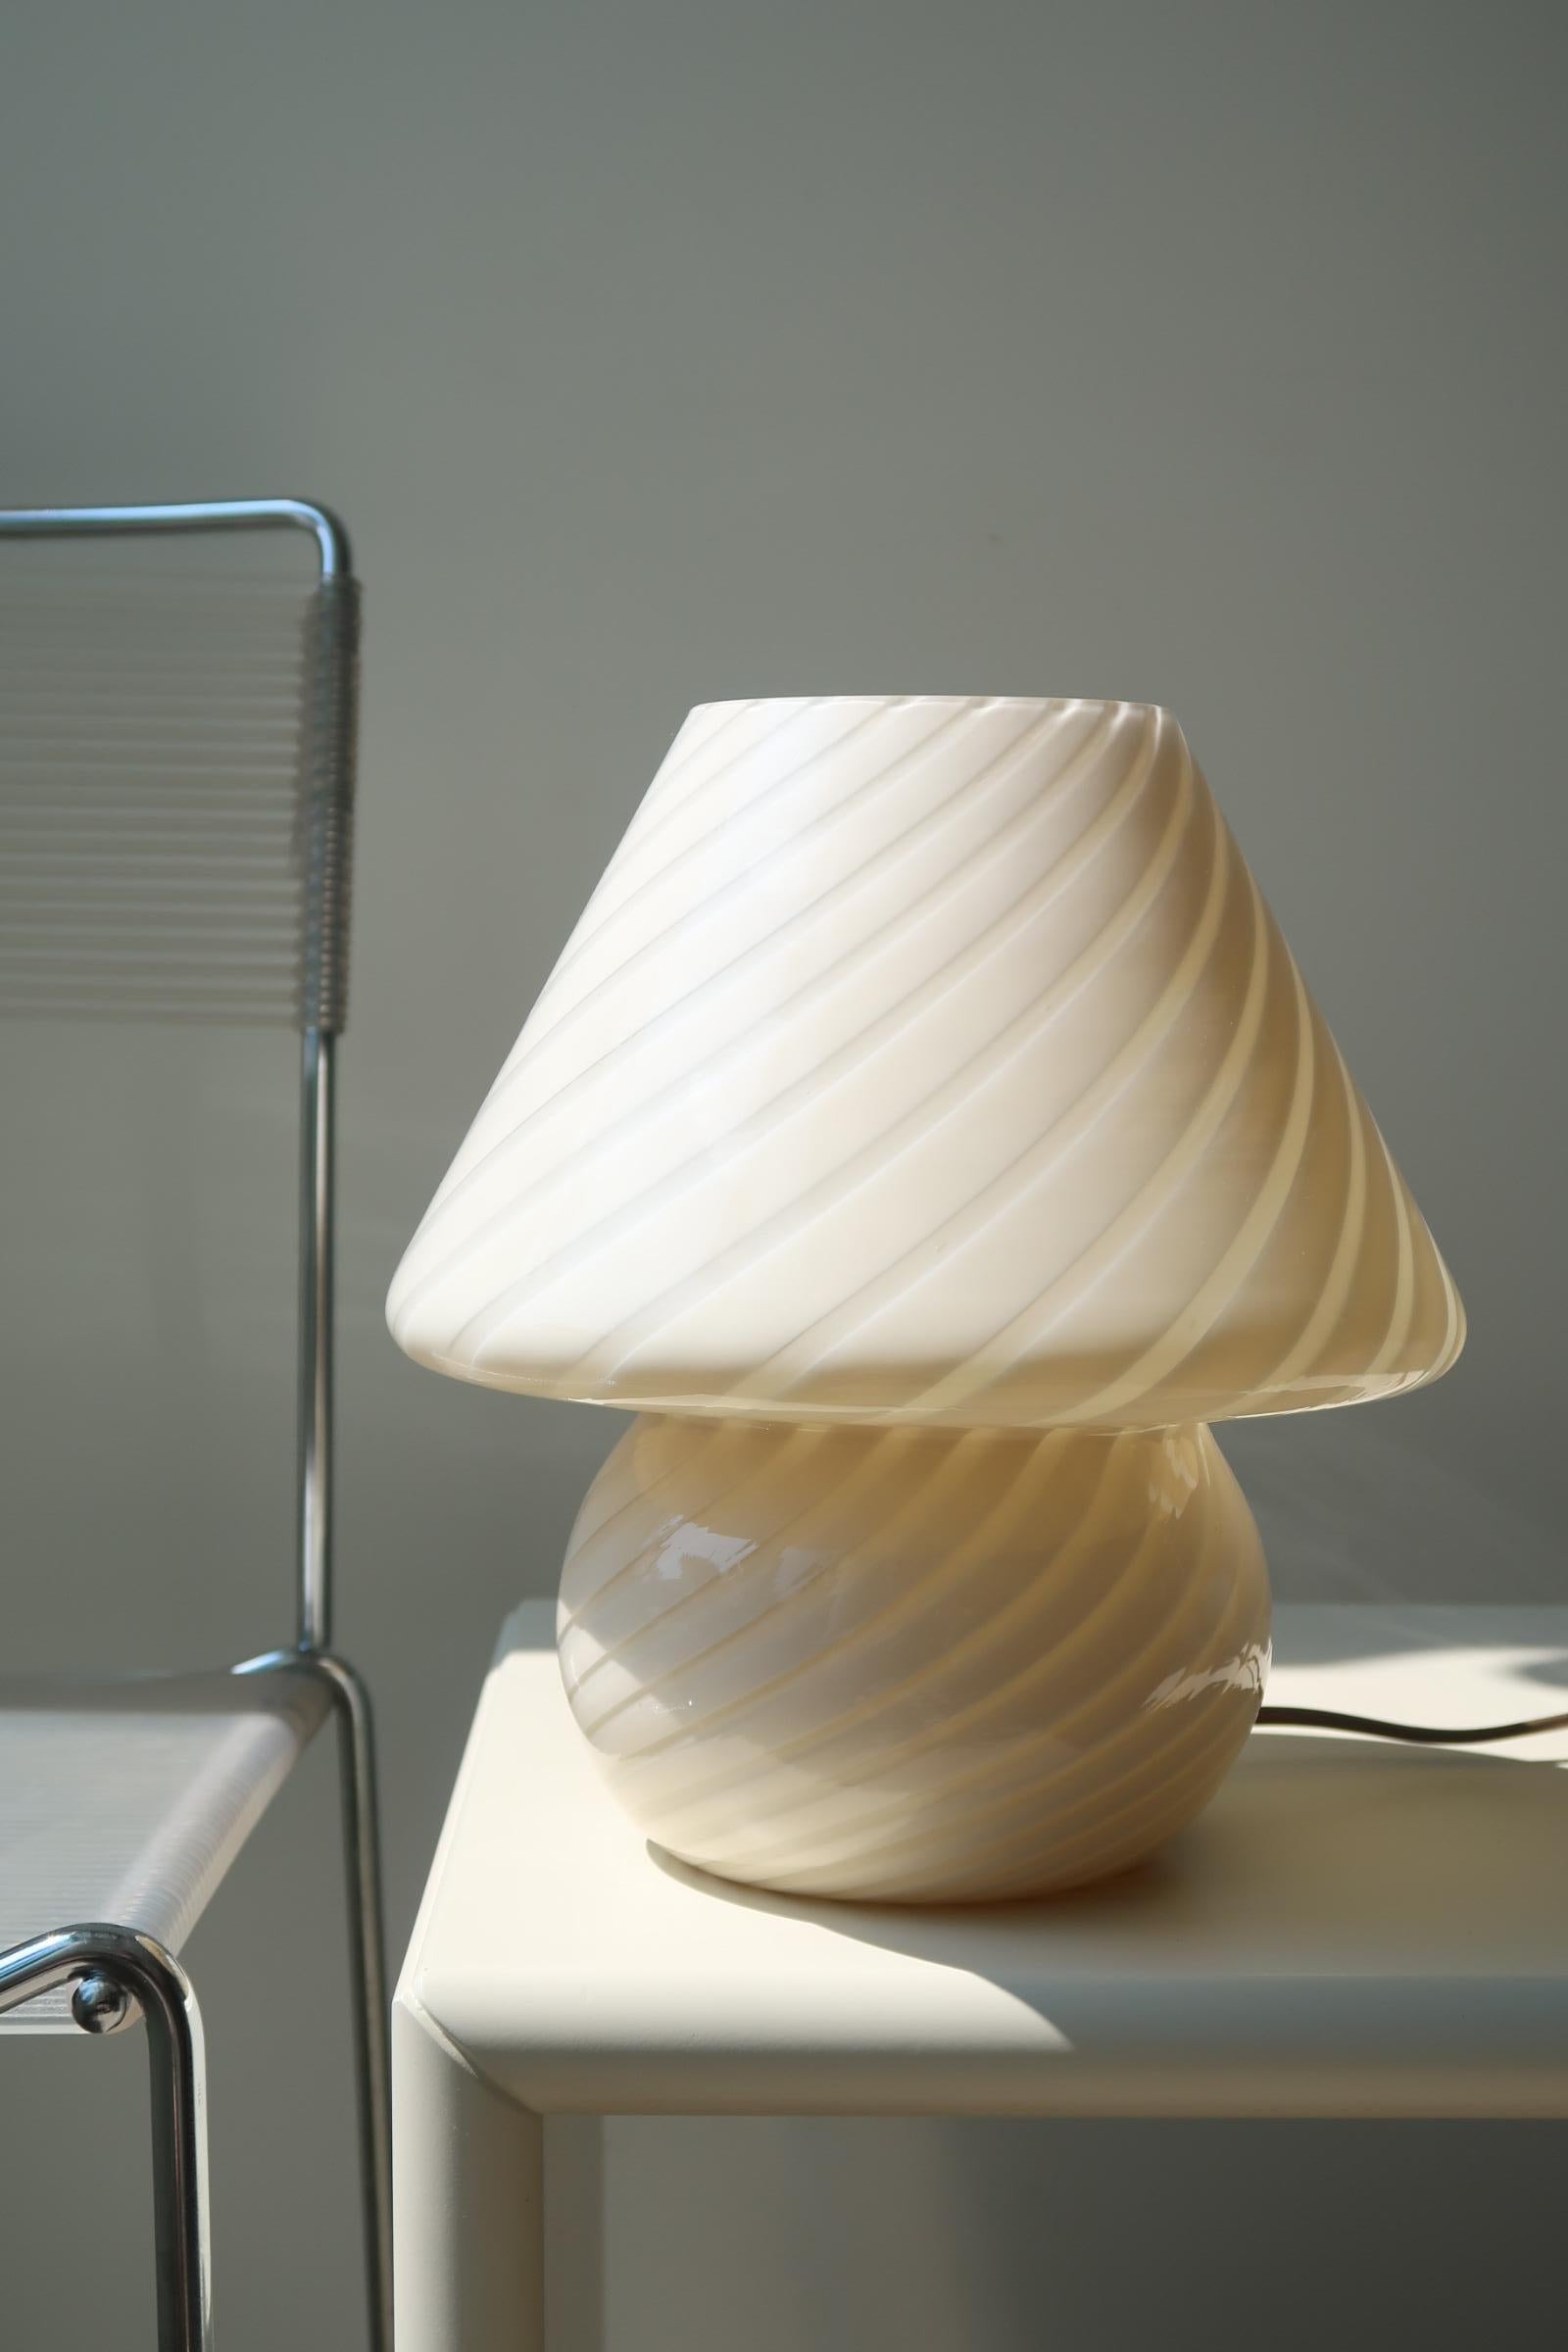 Vintage medium Murano mushroom table lamp in a beautiful cream yellow shade. Mouth-blown in one piece of glass with a swirl pattern. Handmade in Italy, 1960s/70s. ⁠
H: 27 cm D: 24 cm⁠

